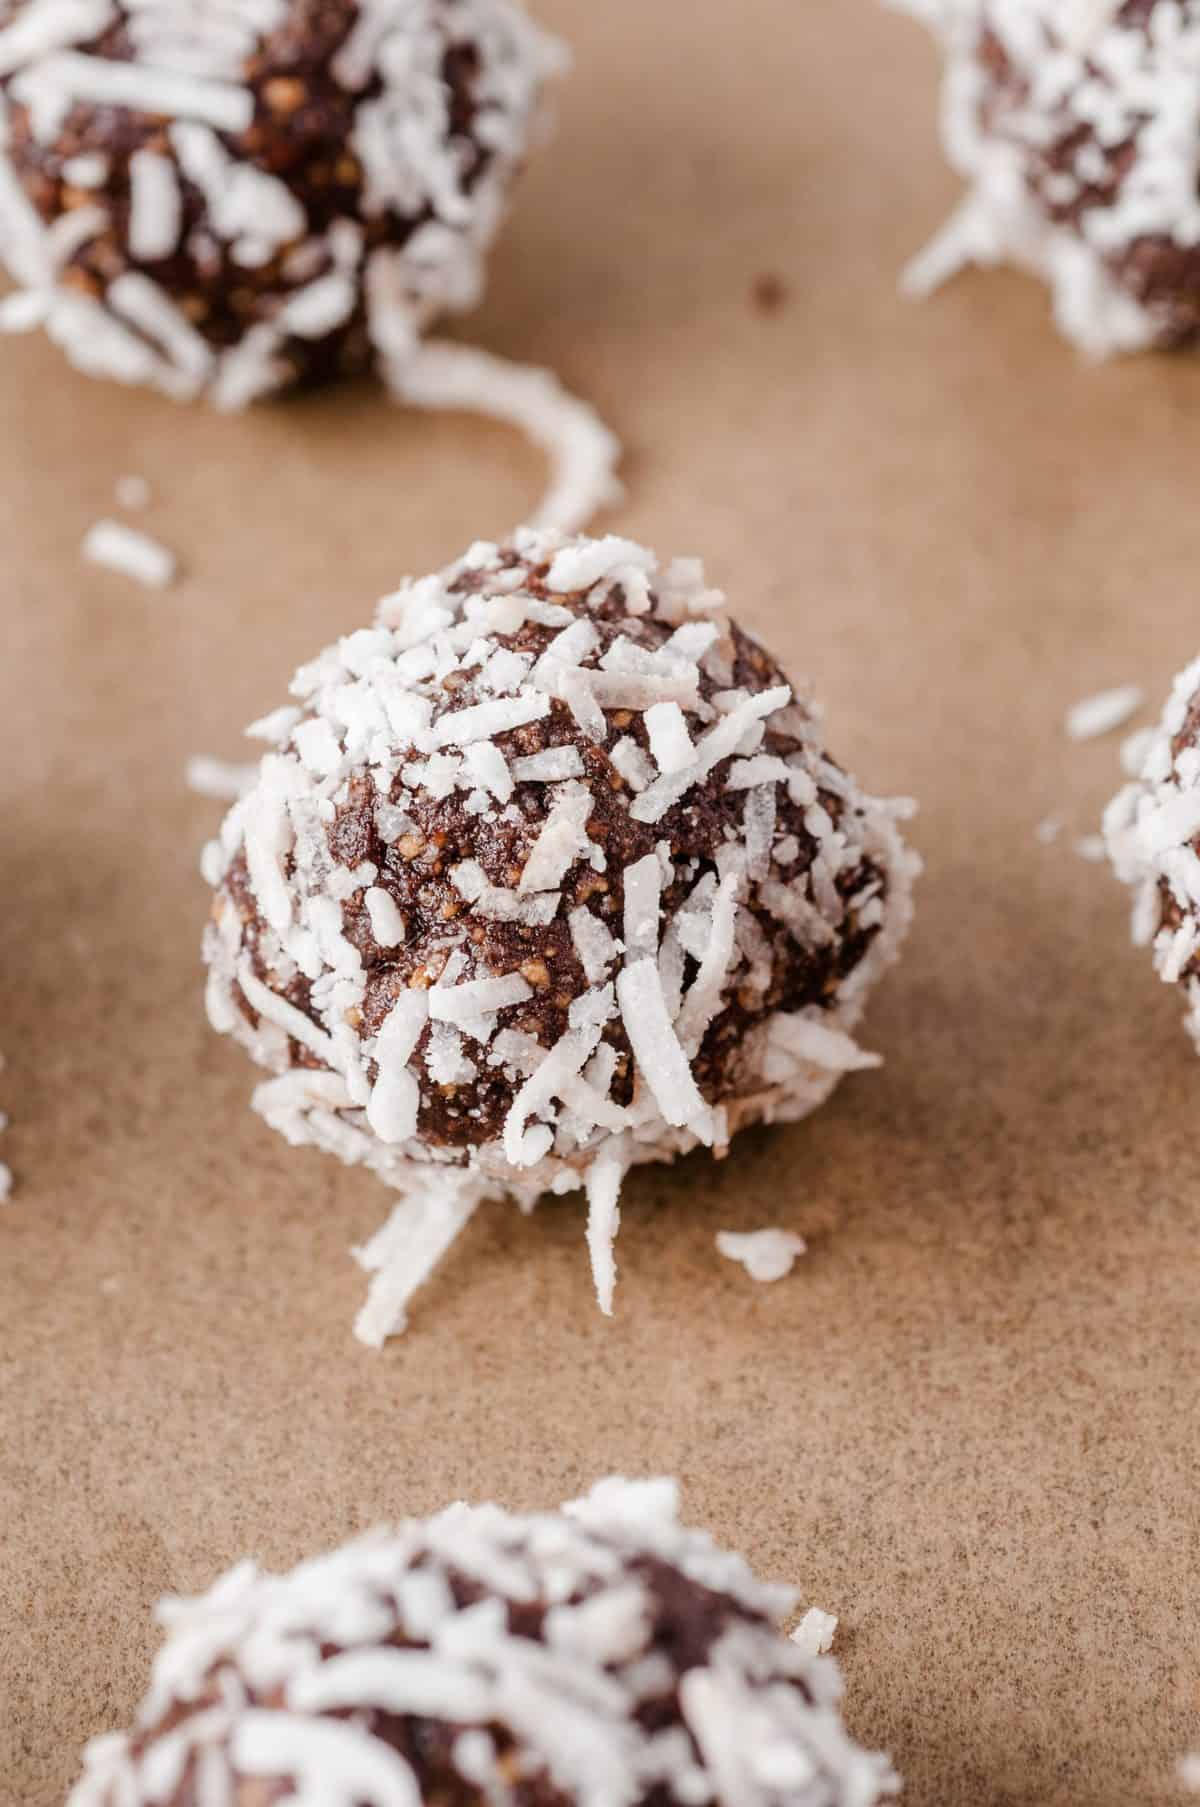 up close photo of chocolate rum ball rolled in shredded coconut